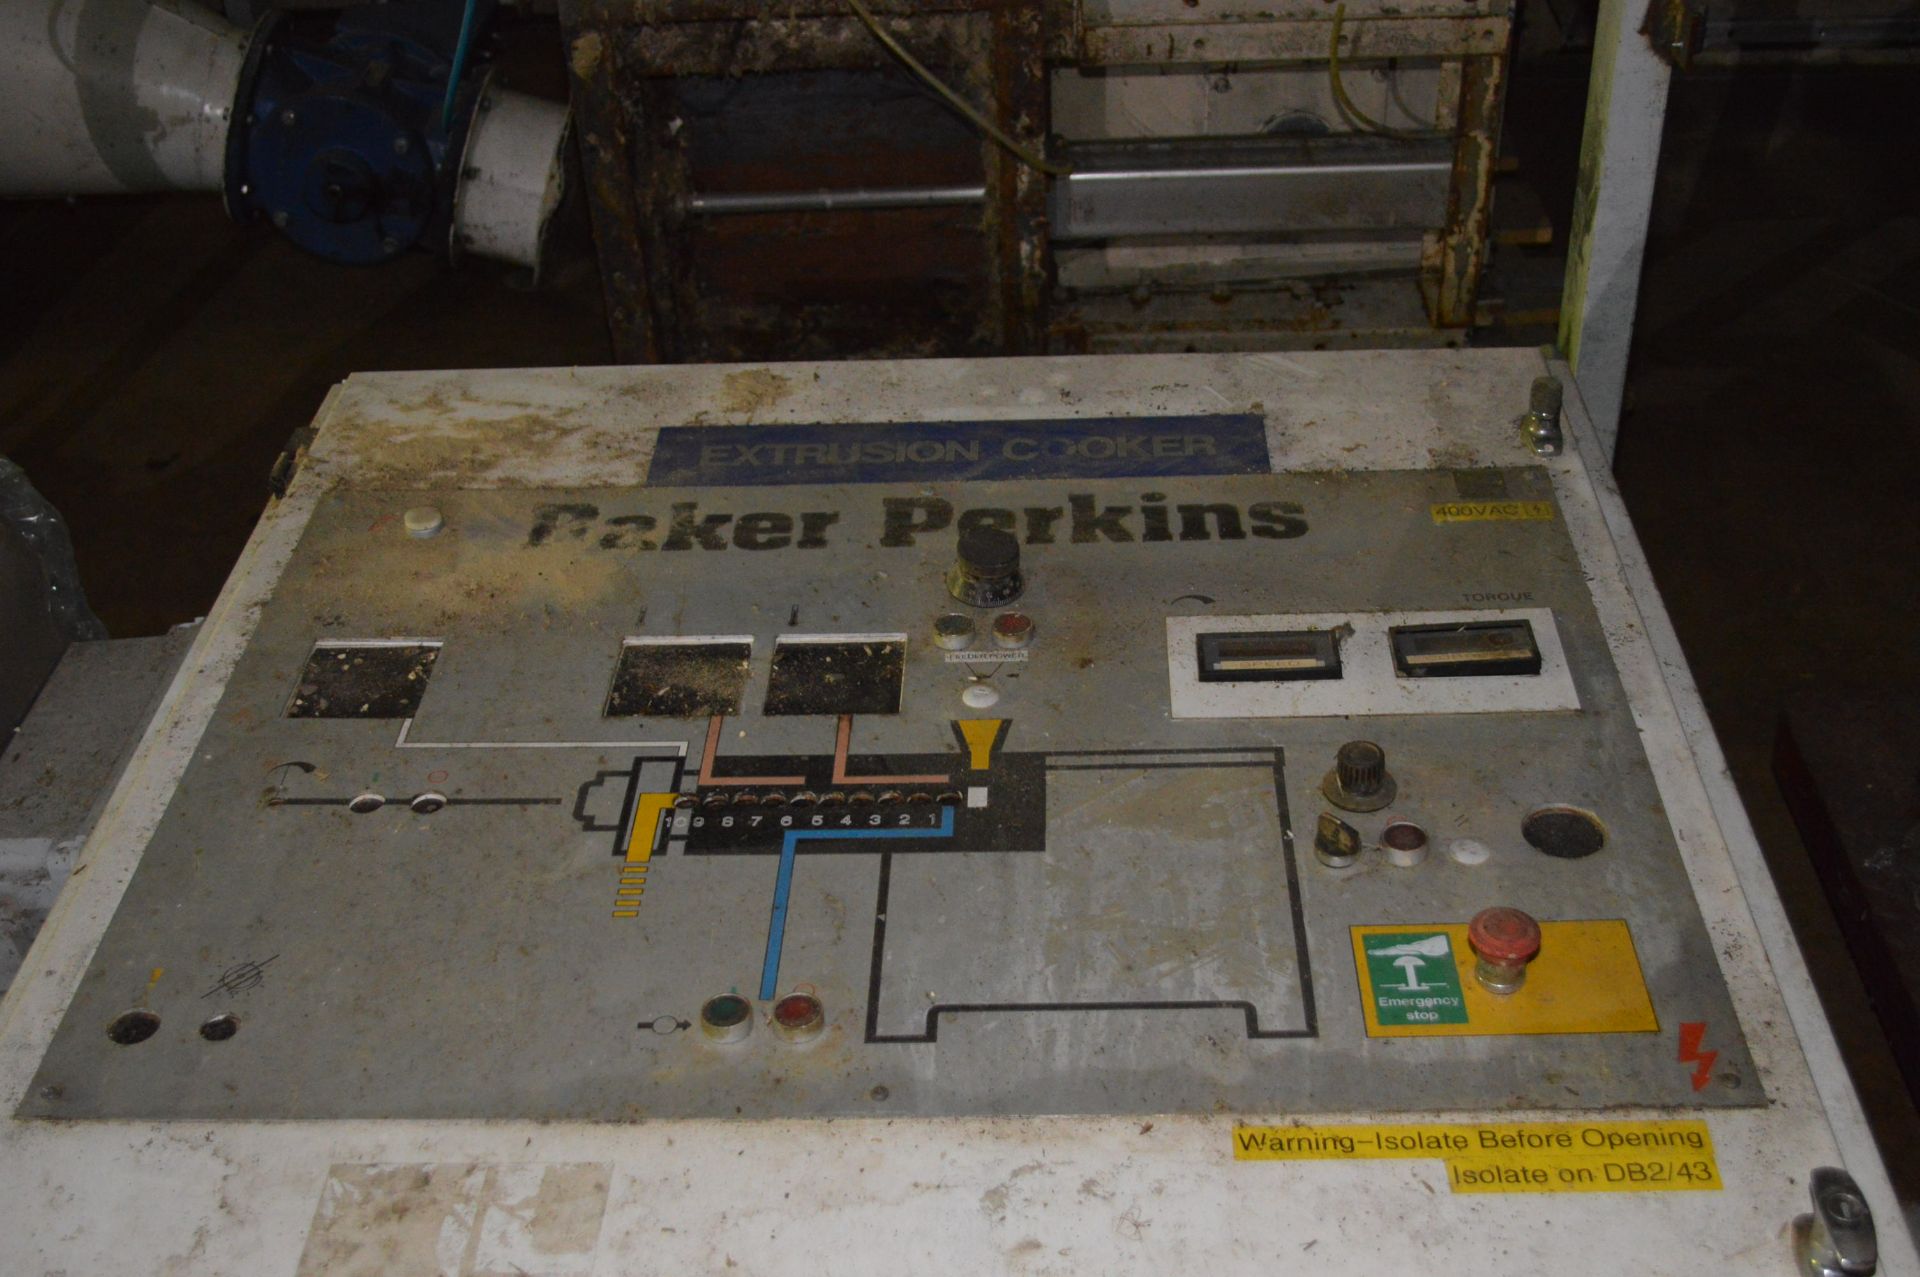 Baker Perkins EXTRUSION COOKER PILOT PLANT, with c - Image 18 of 23